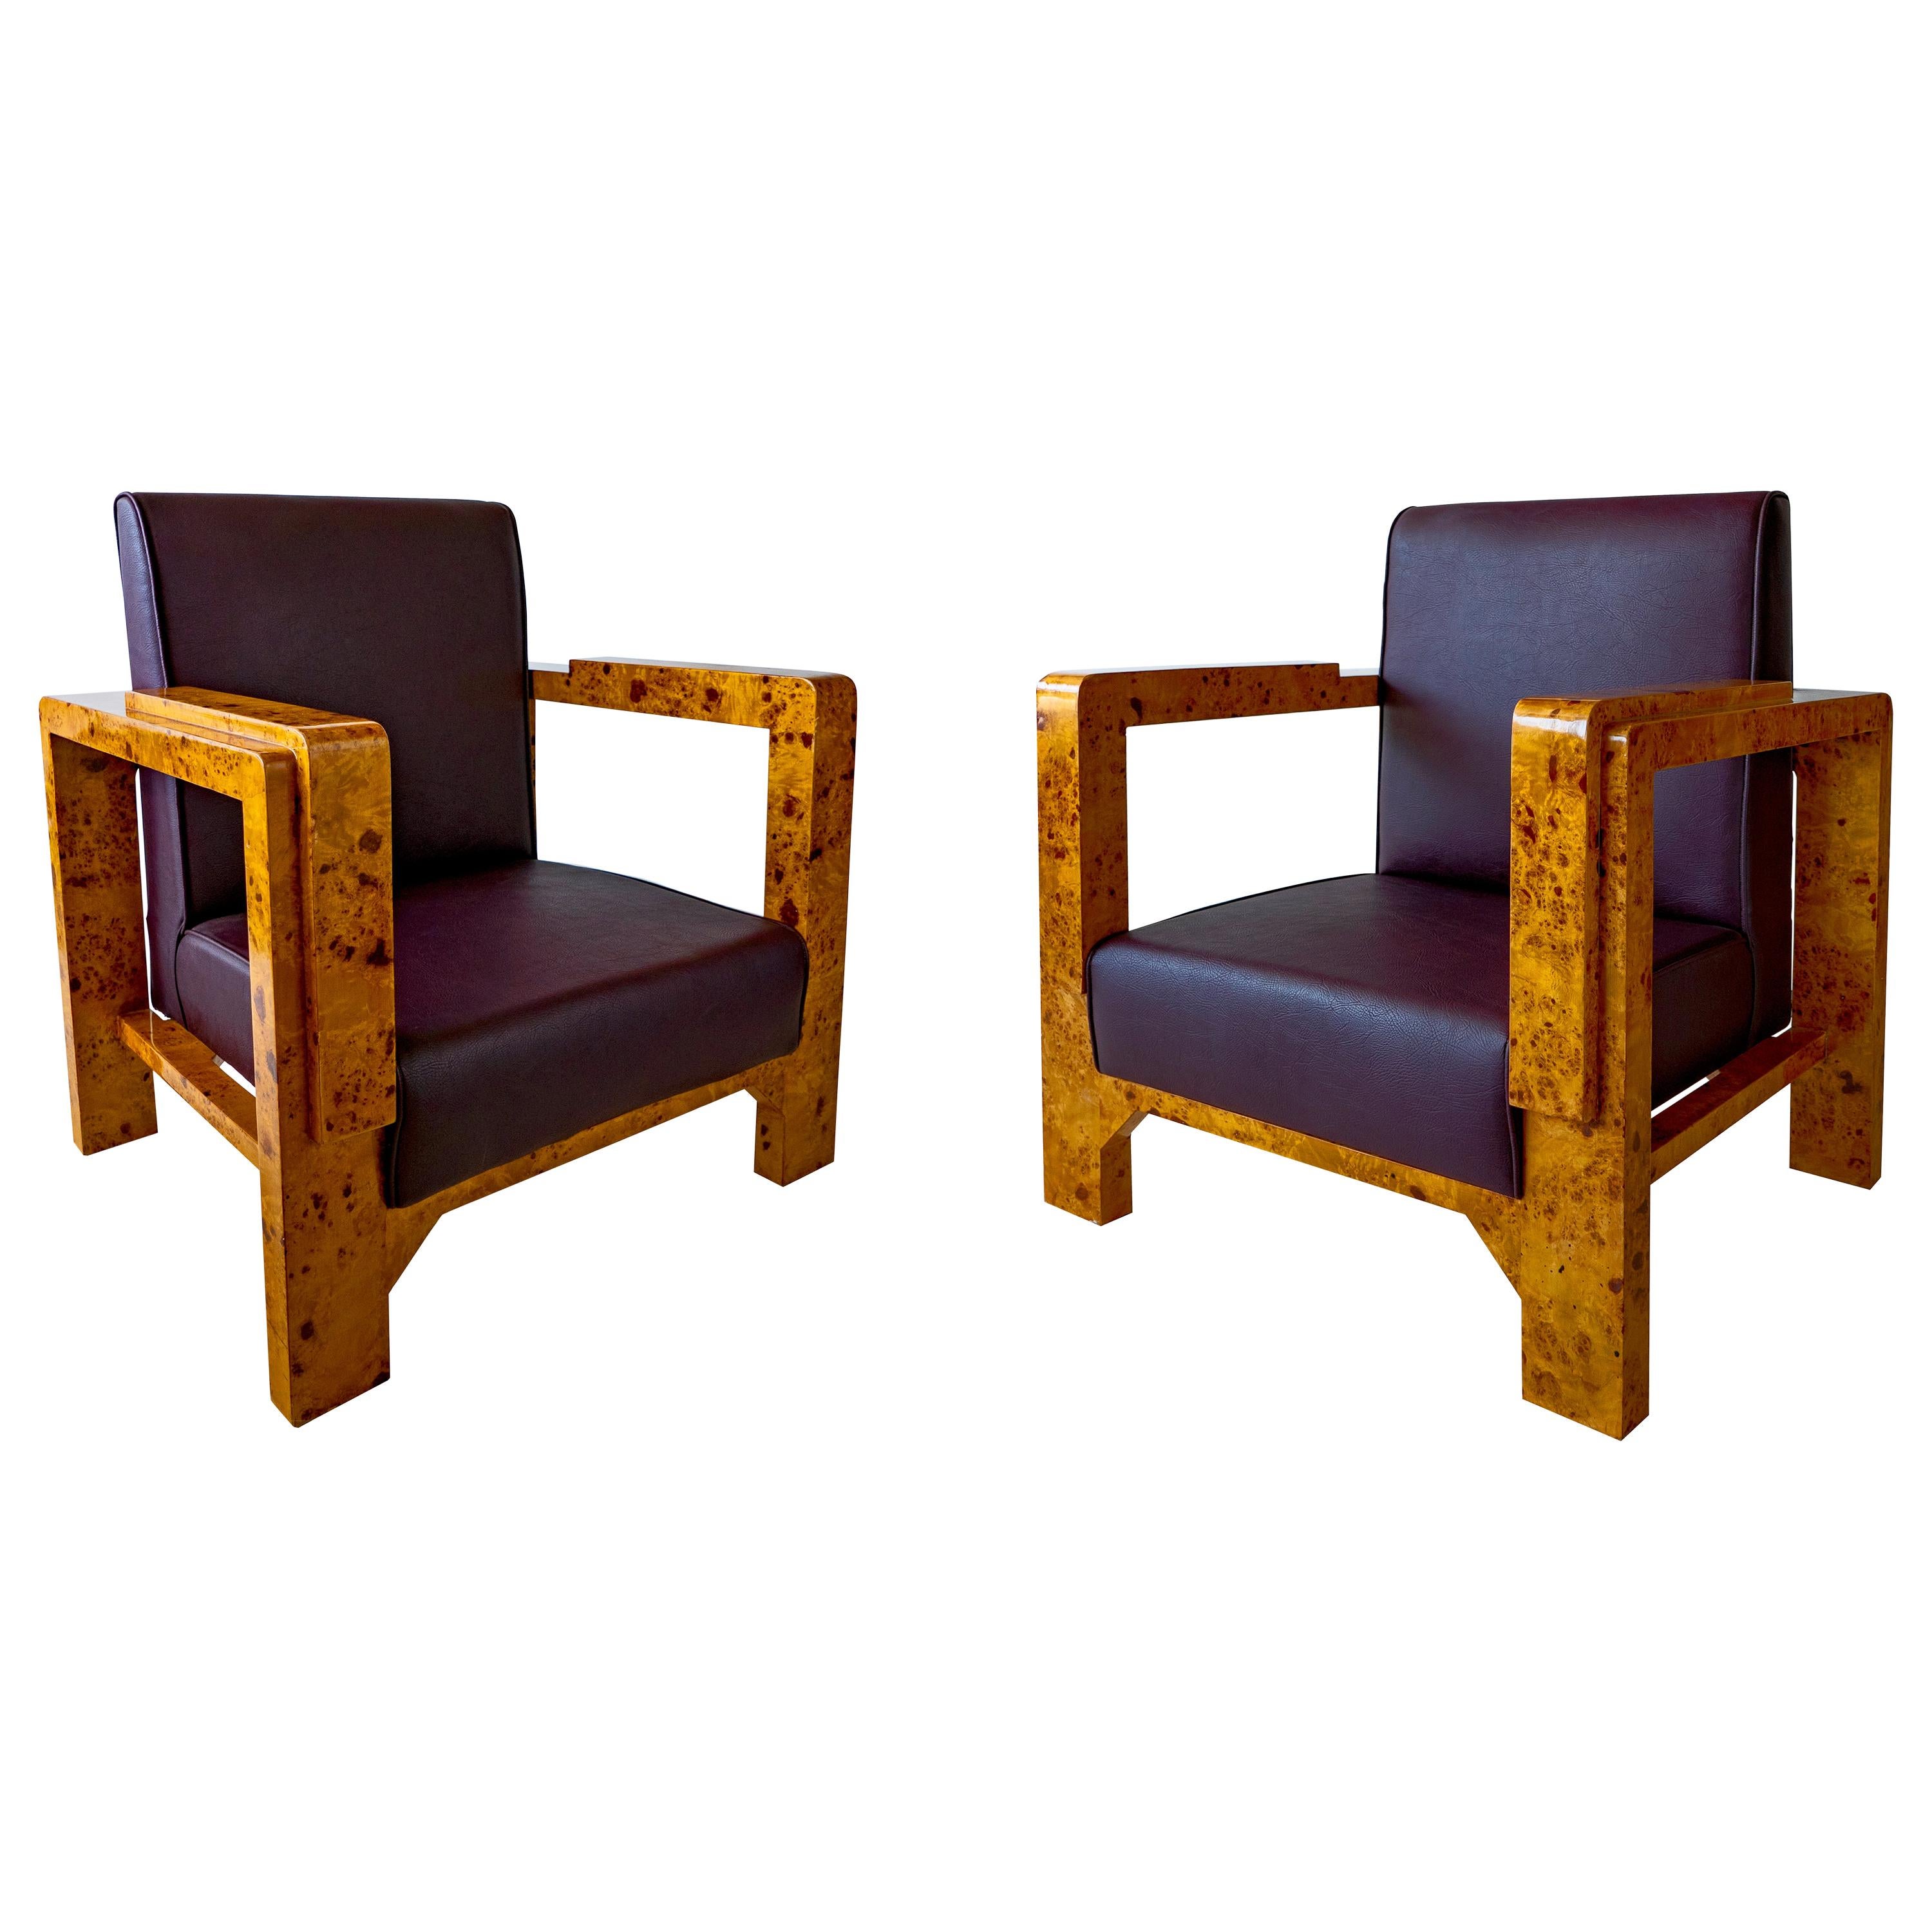 Pair of Hungarian Late Art Deco Burled Walnut and Rootwood Armchairs